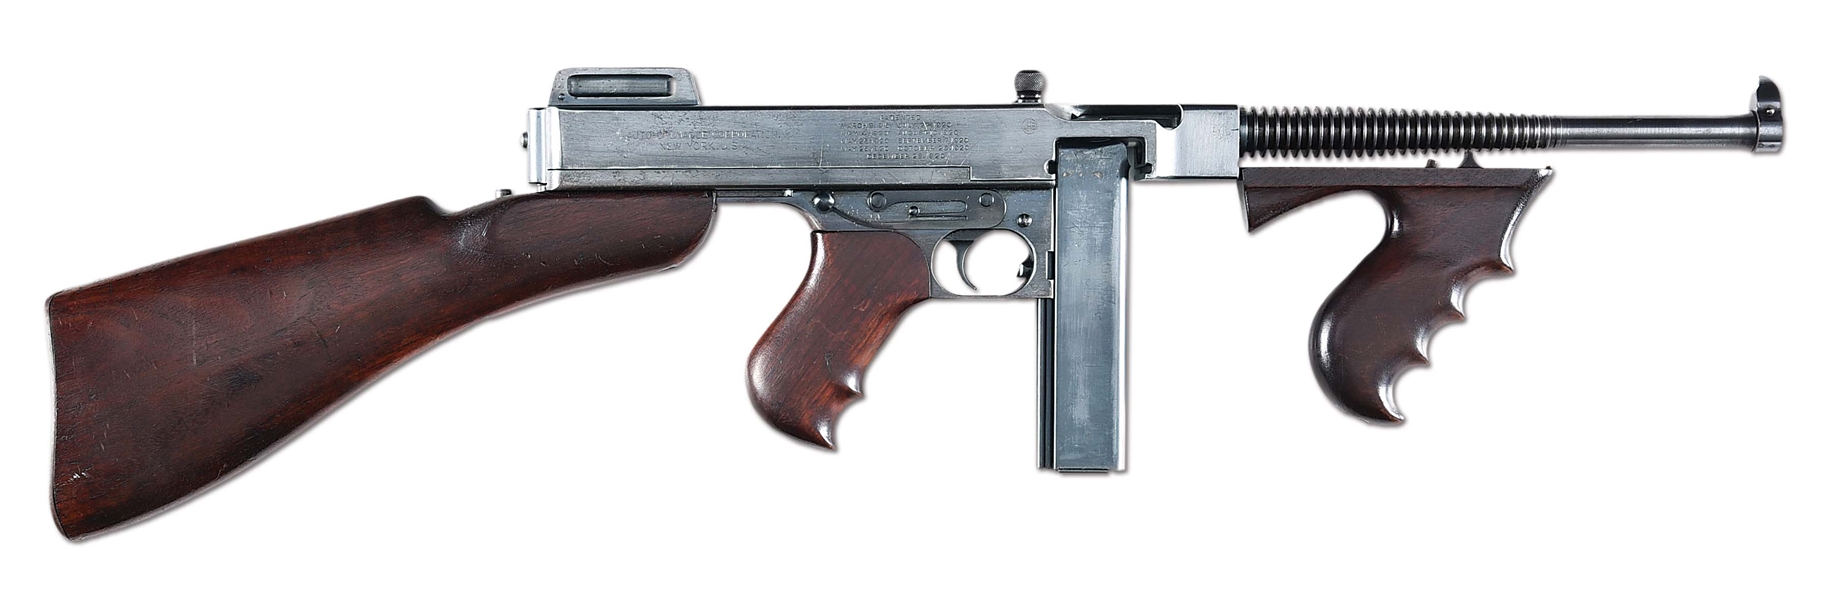 (N) LOW THREE DIGIT NUMBER COLT THOMPSON 1921A MACHINE GUN (CURIO AND RELIC).